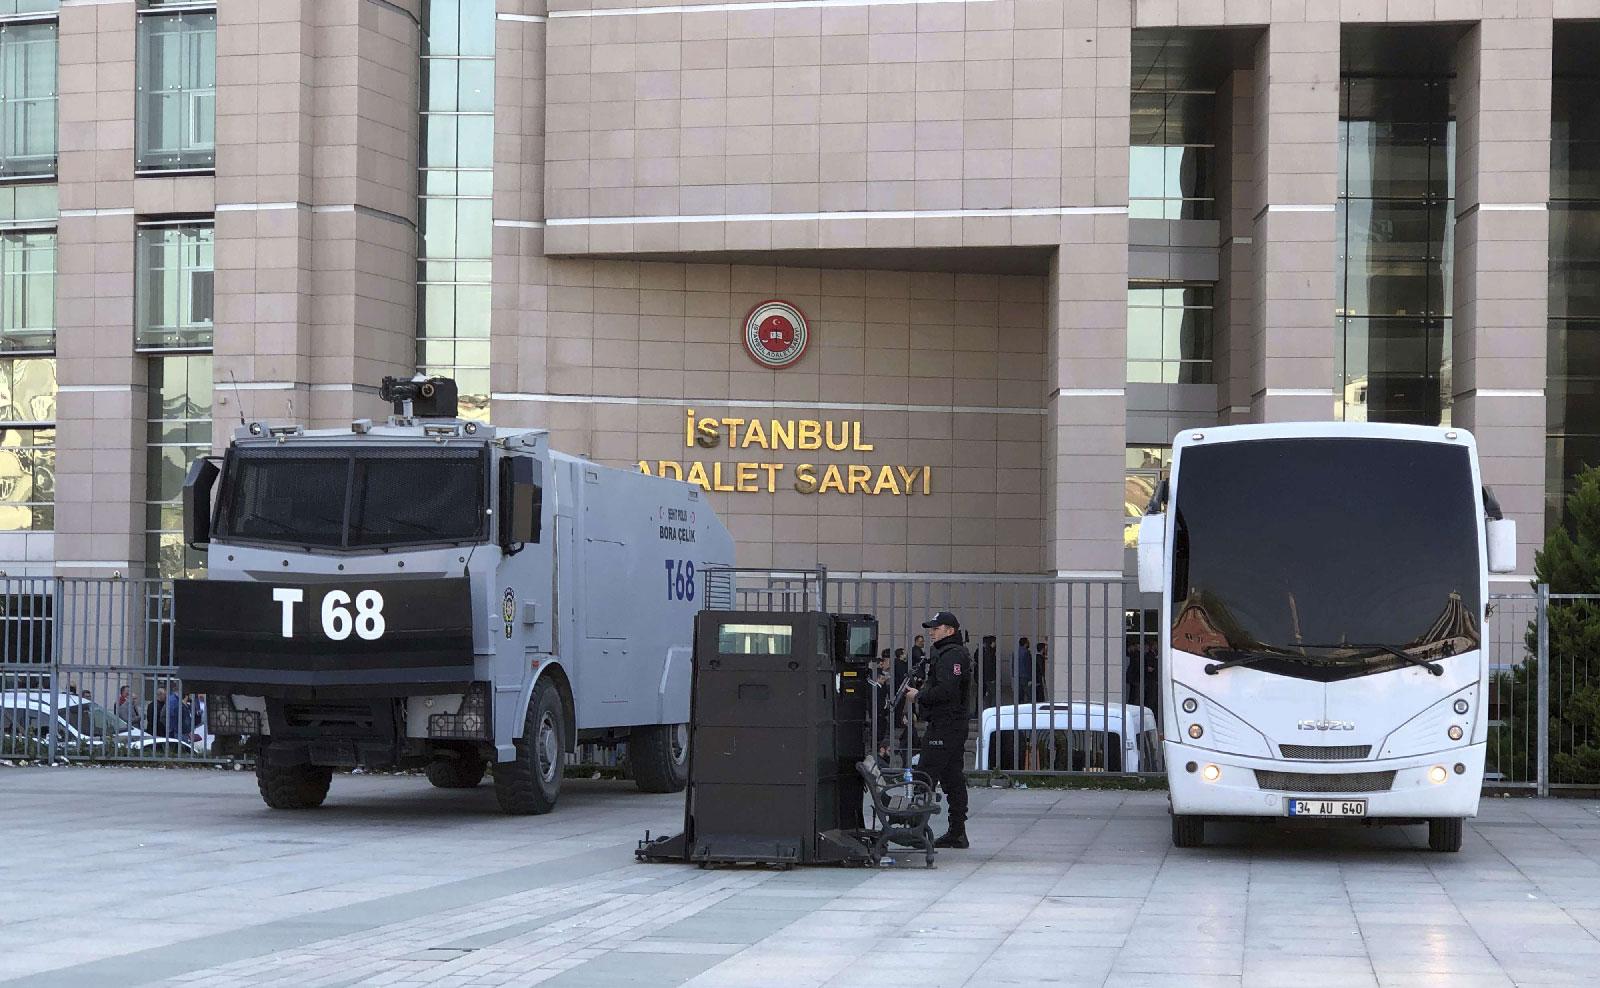 A Turkish police officer stands guard outside Istanbul's courthouse on March 26, 2019, during the trial of a US consulate staffer accused of spying and attempting to overthrow the government.